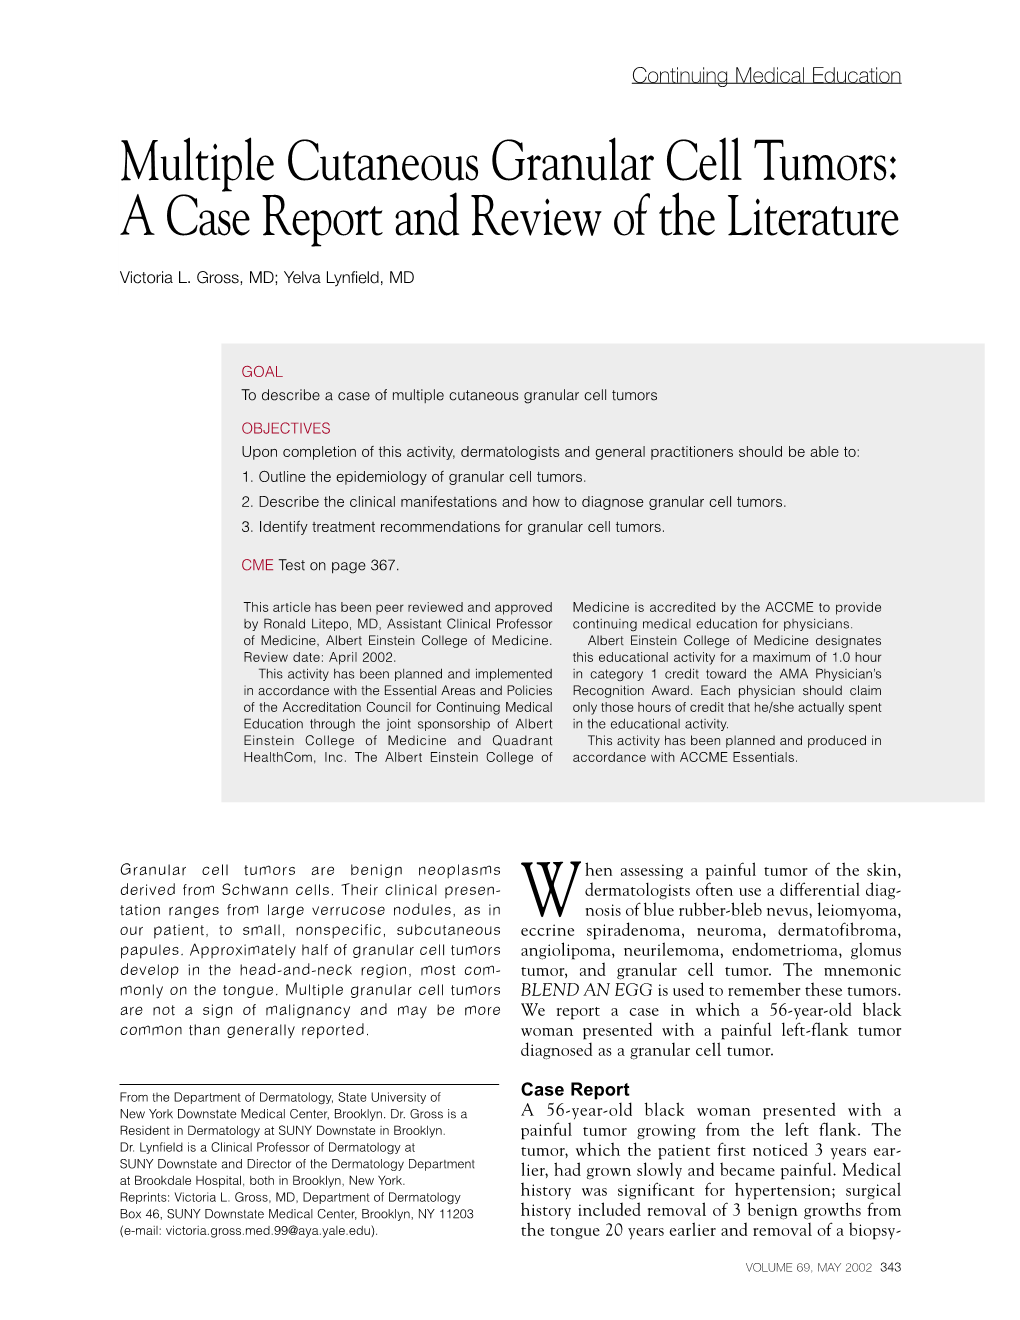 Multiple Cutaneous Granular Cell Tumors: a Case Report and Review of the Literature